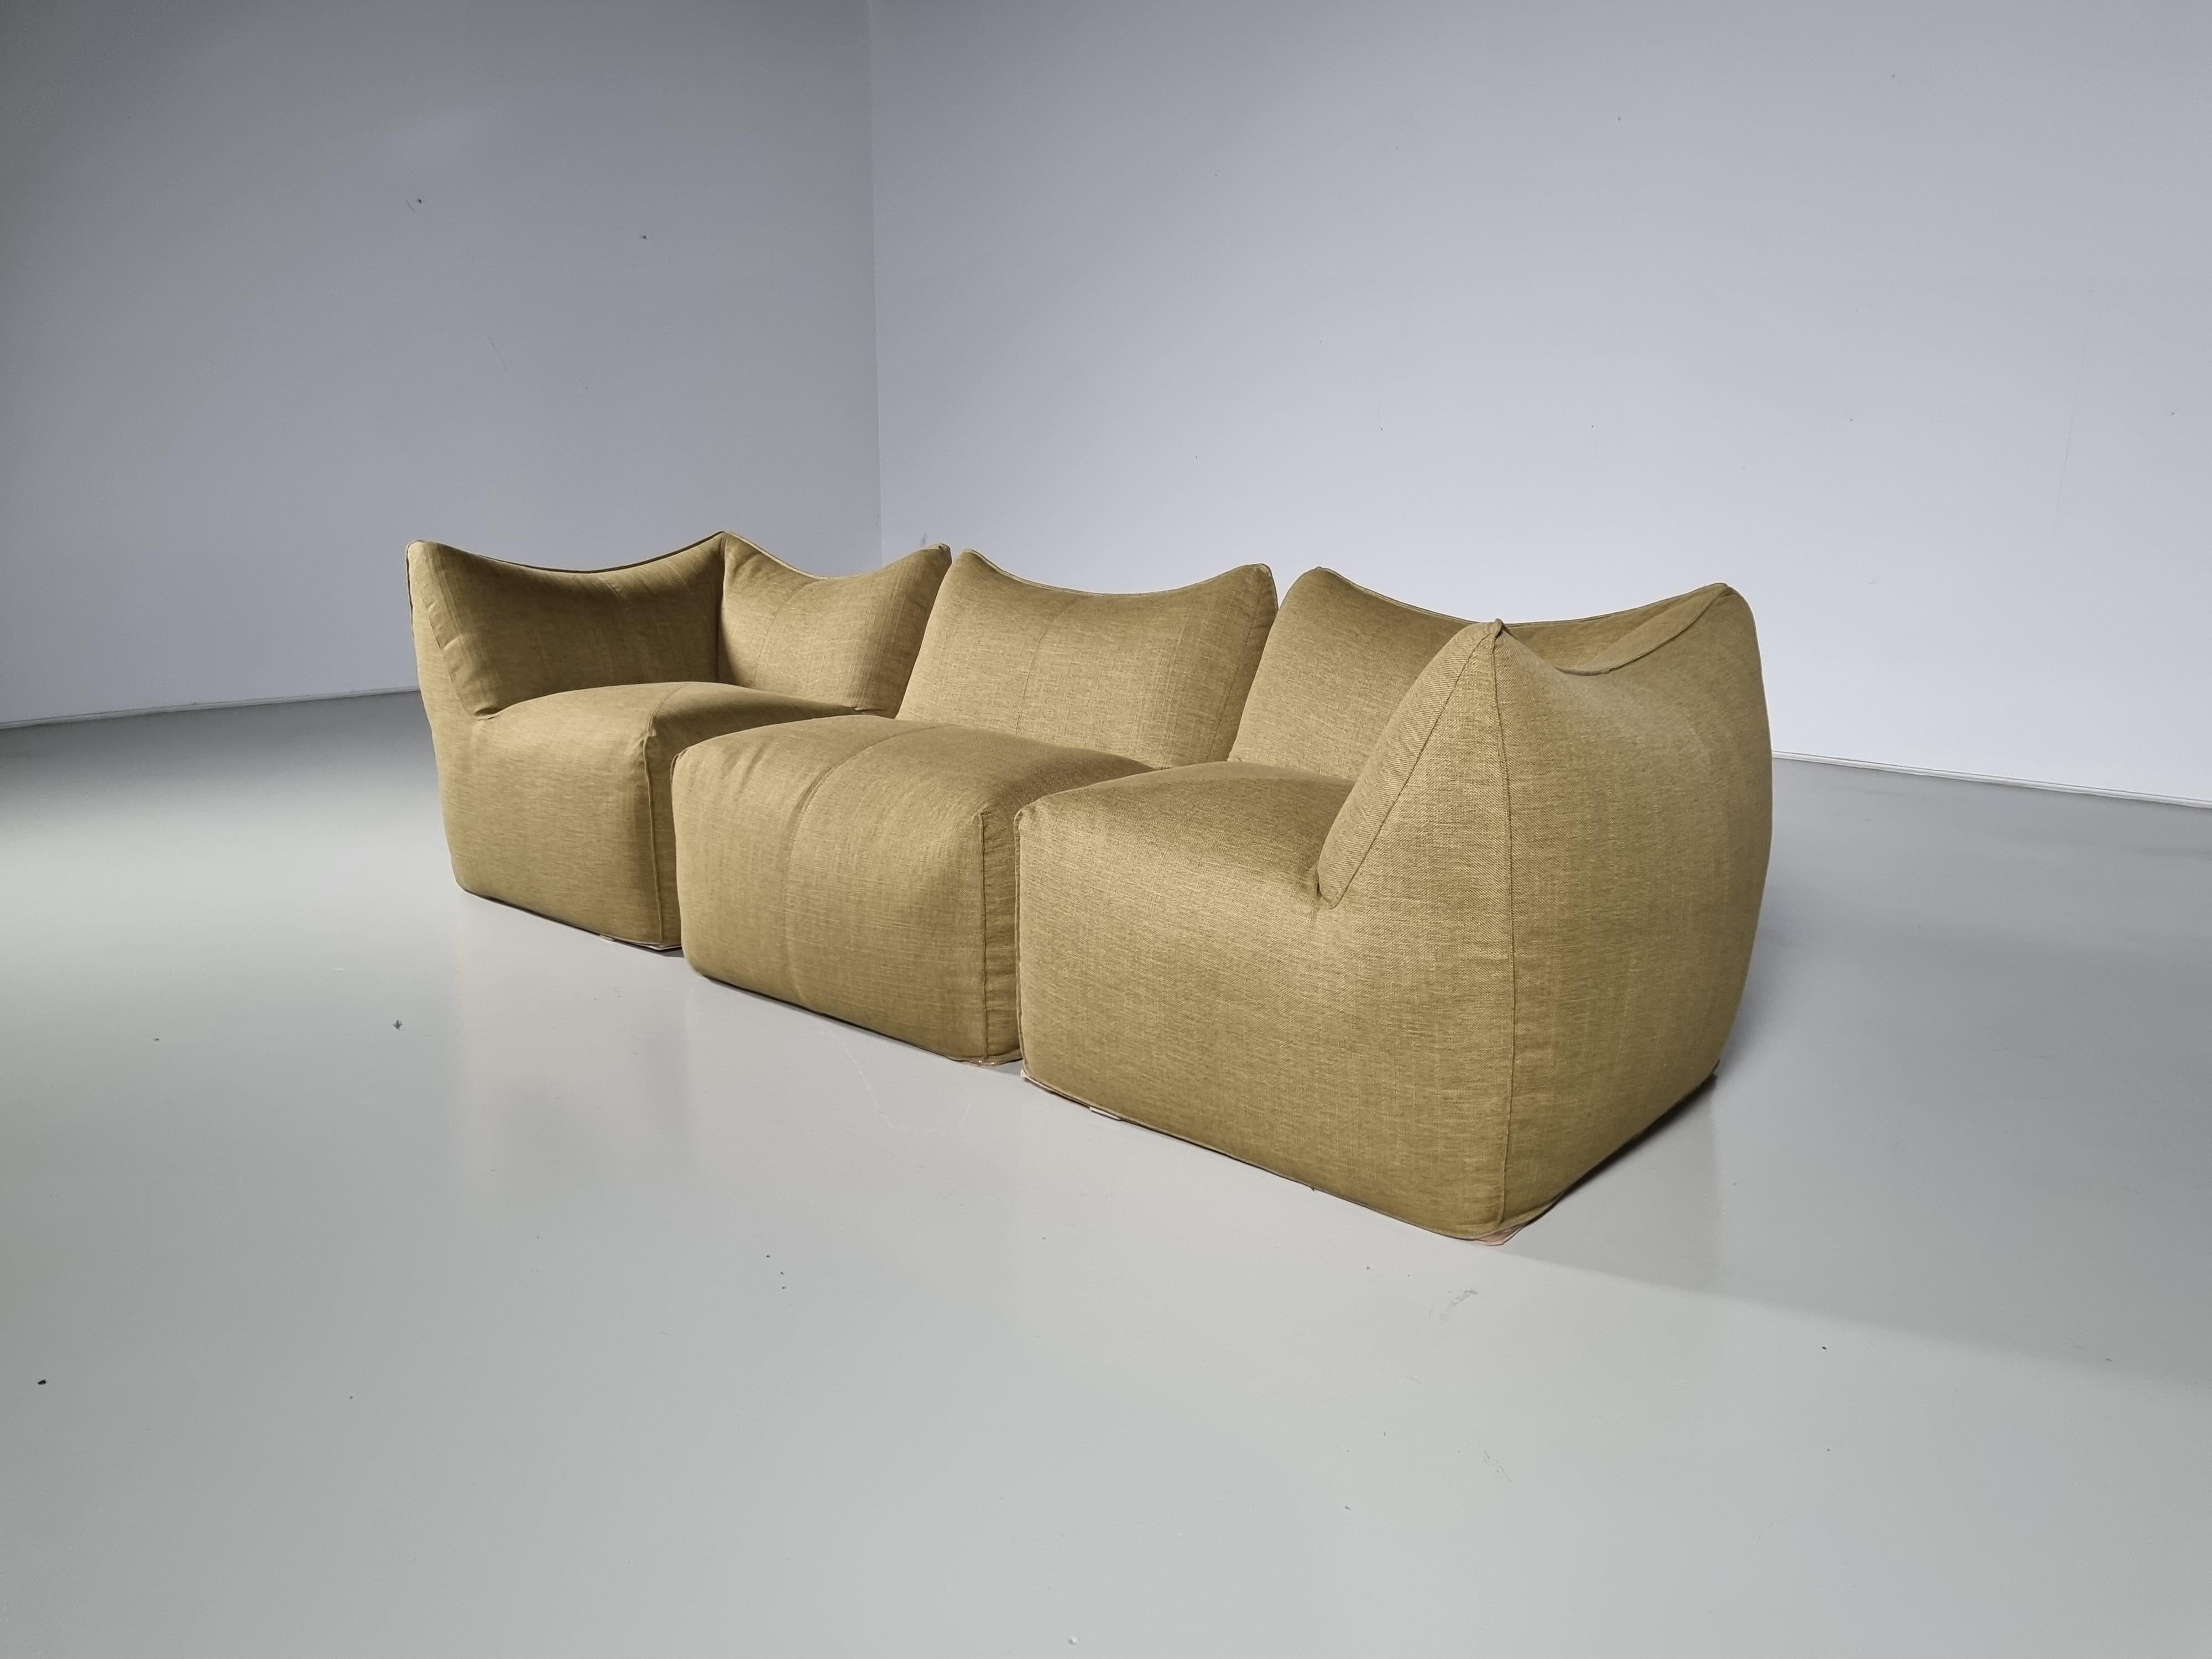 Le Bambole sectional sofa by Mario Bellini for B&B Italia, 1970s. The Bambole is an iconic piece of Italian design. It was awarded the 1979 'Compasso d'Oro' award. An example of Le Bambole is included in MoMA's permanent collection. It's well known